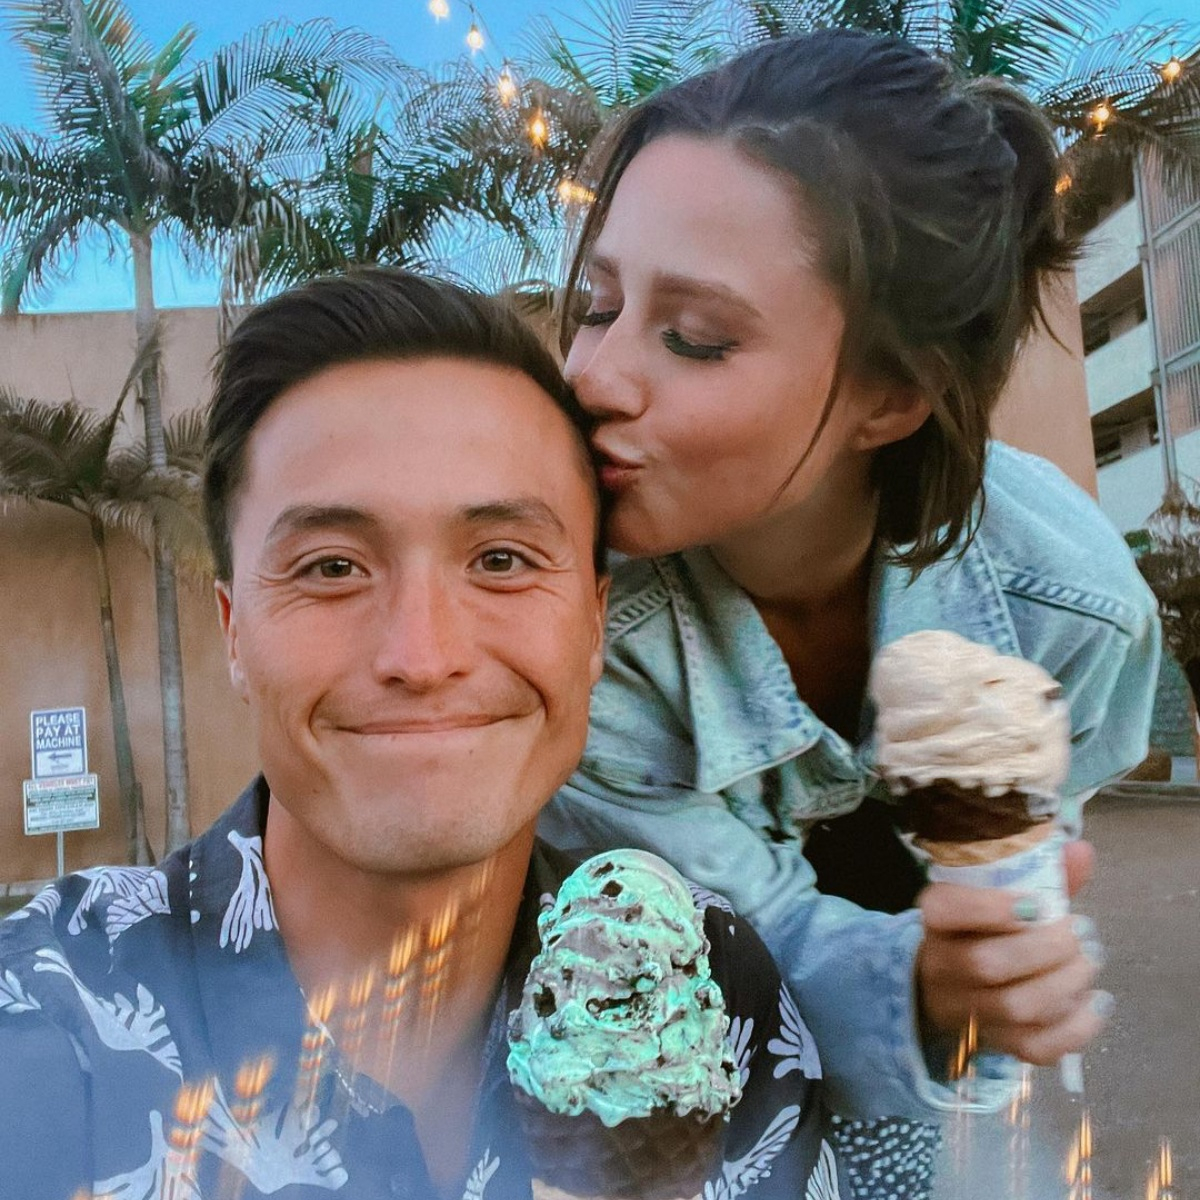 Bachelor Nation's Katie Thurston and John Hersey Reunite at County Fair Days After Breakup